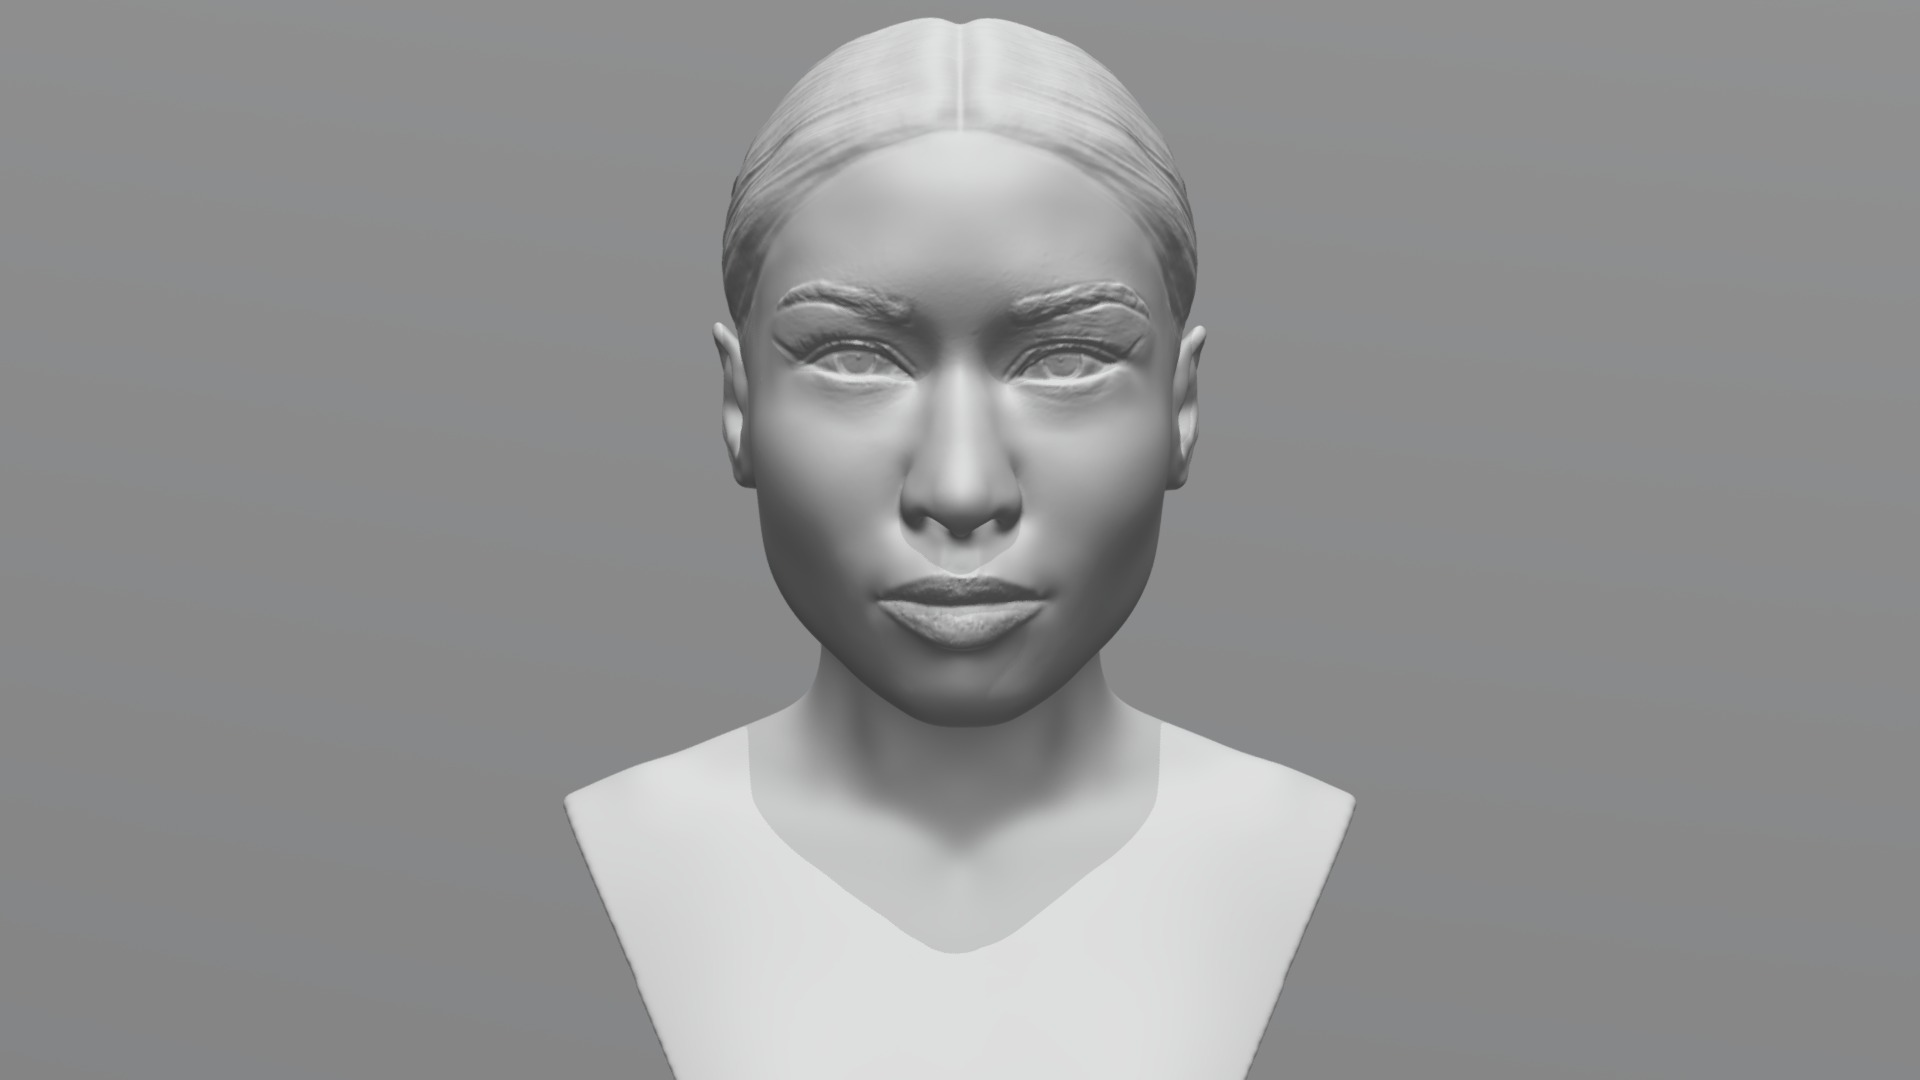 3D model Nicki Minaj bust for 3D printing - This is a 3D model of the Nicki Minaj bust for 3D printing. The 3D model is about a person with a white shirt.